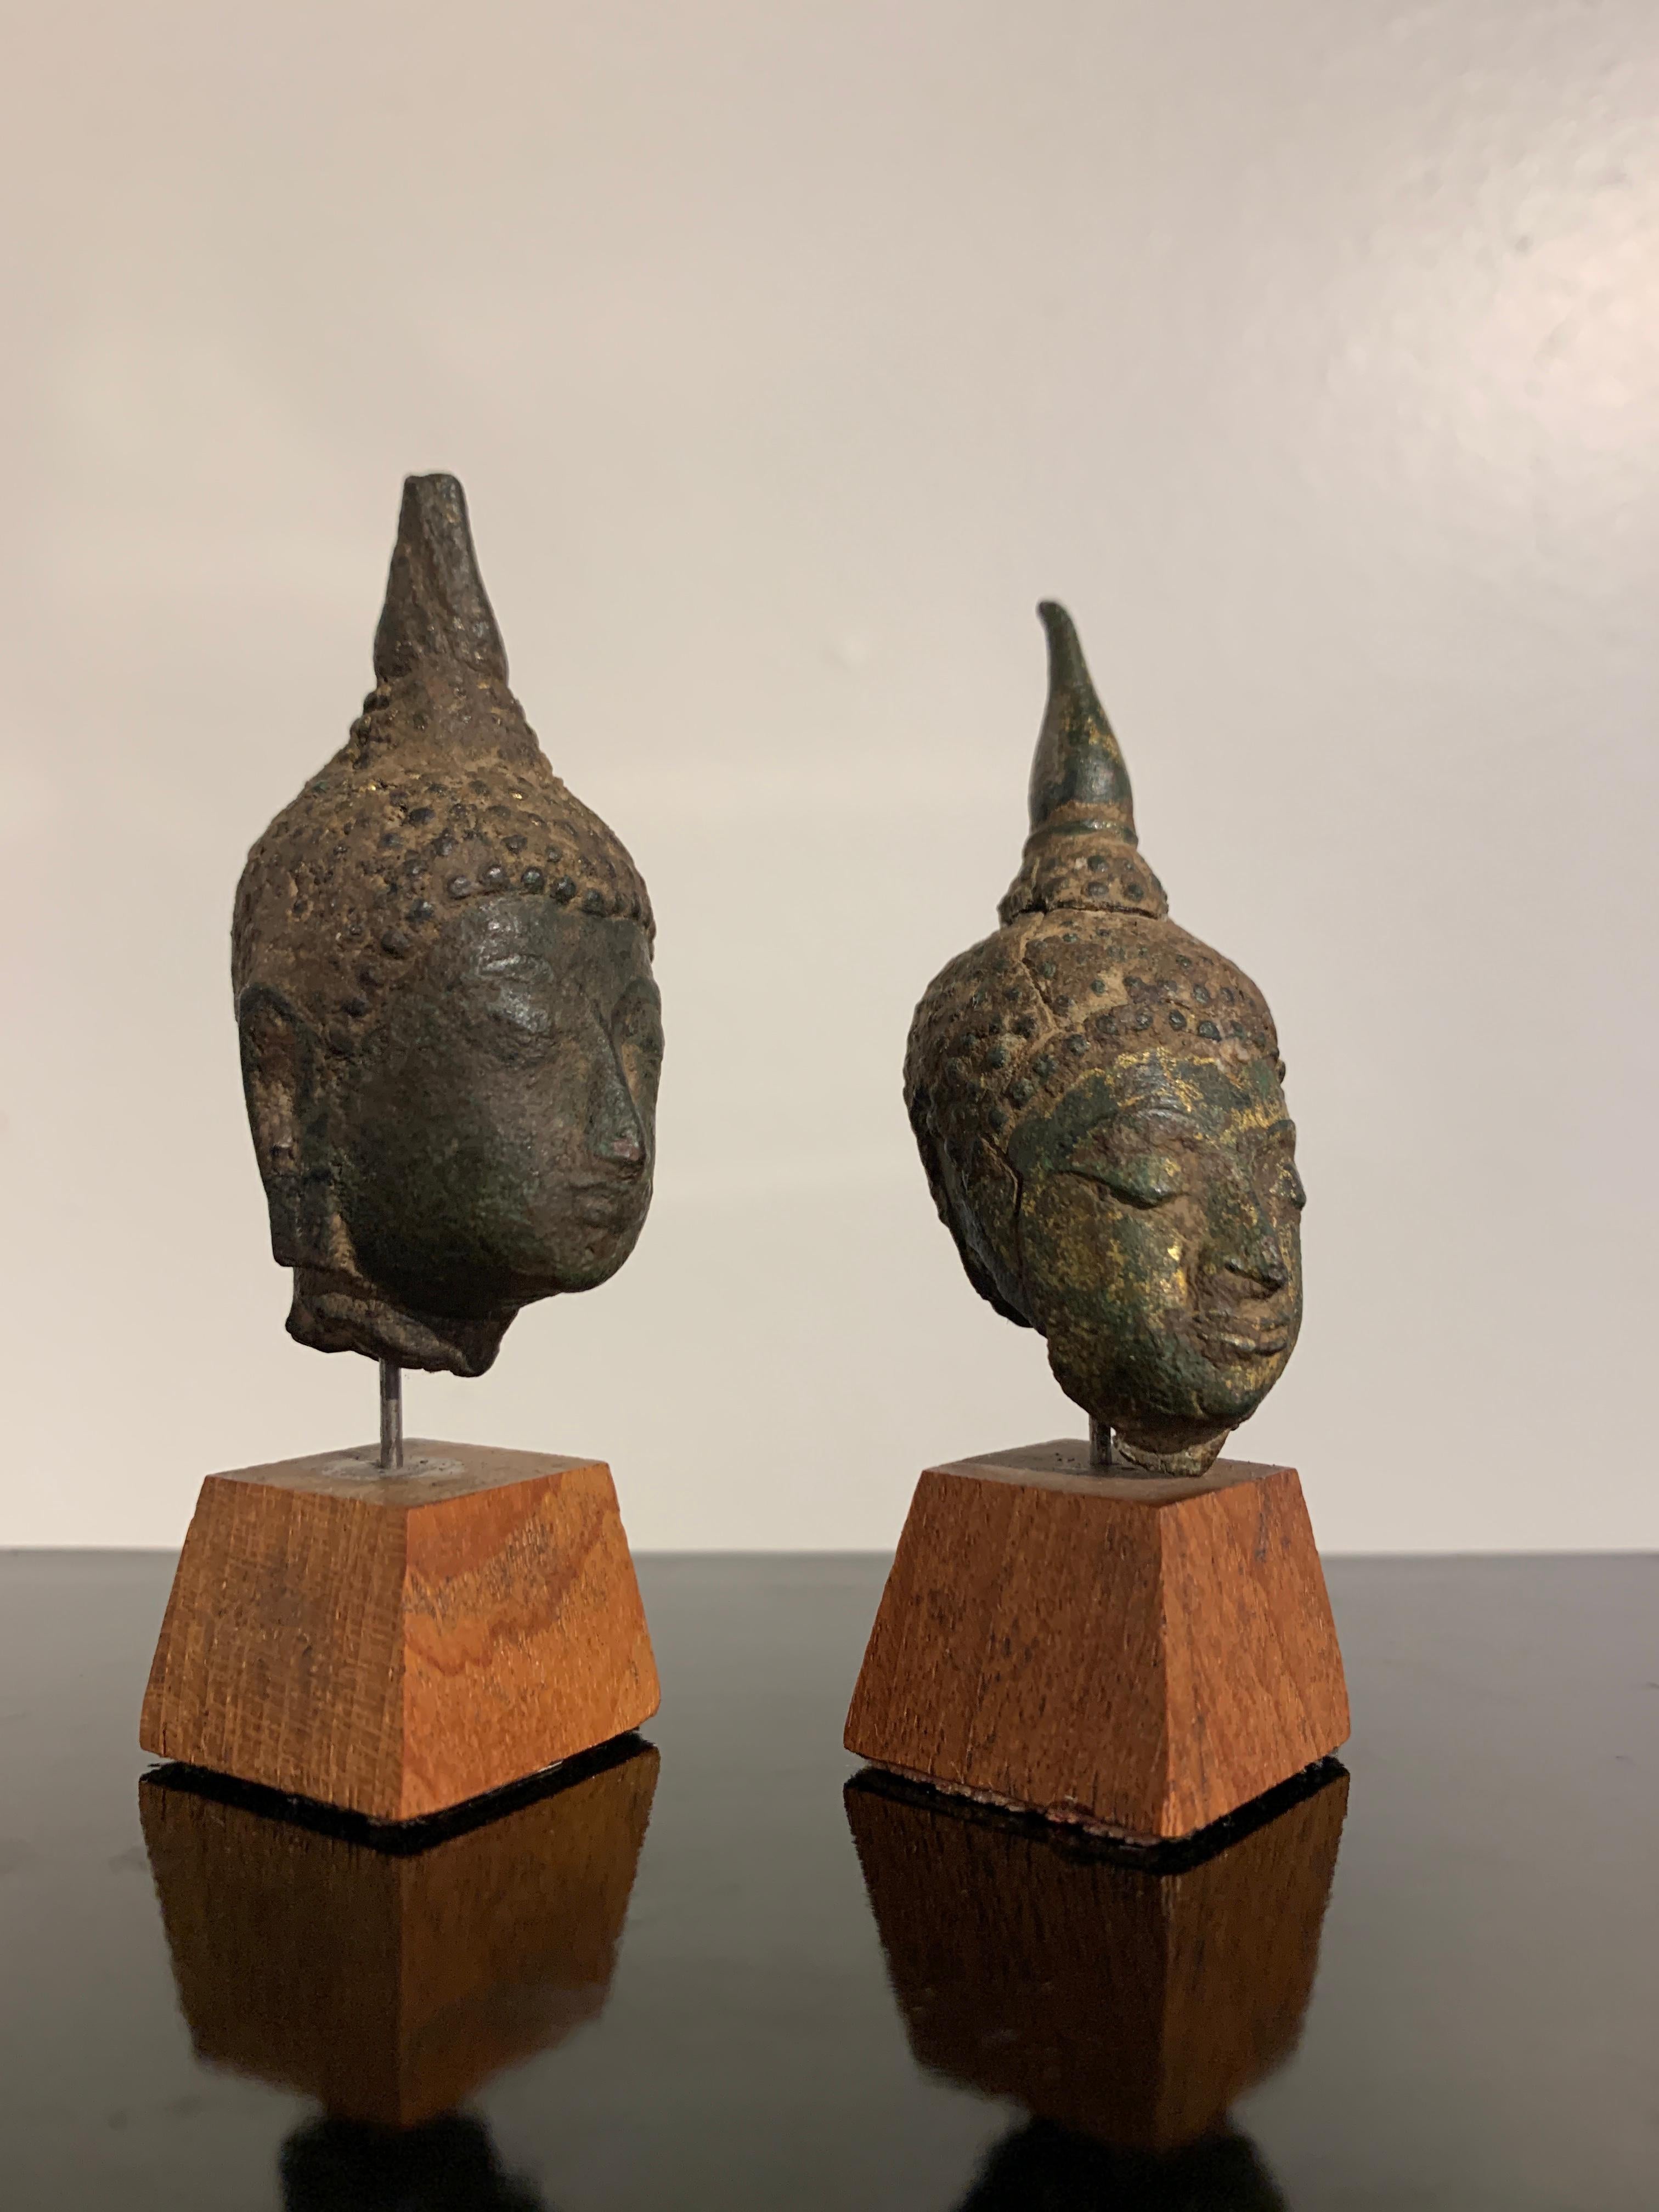 Two miniature and fragmentary heads of the Buddha, cast bronze with remnants of gilding, Sukhothai period, 15th century, Thailand.

The tiny heads both with typical Sukhothai features, their slim, oval faces topped by a prominent ushnisha and tall